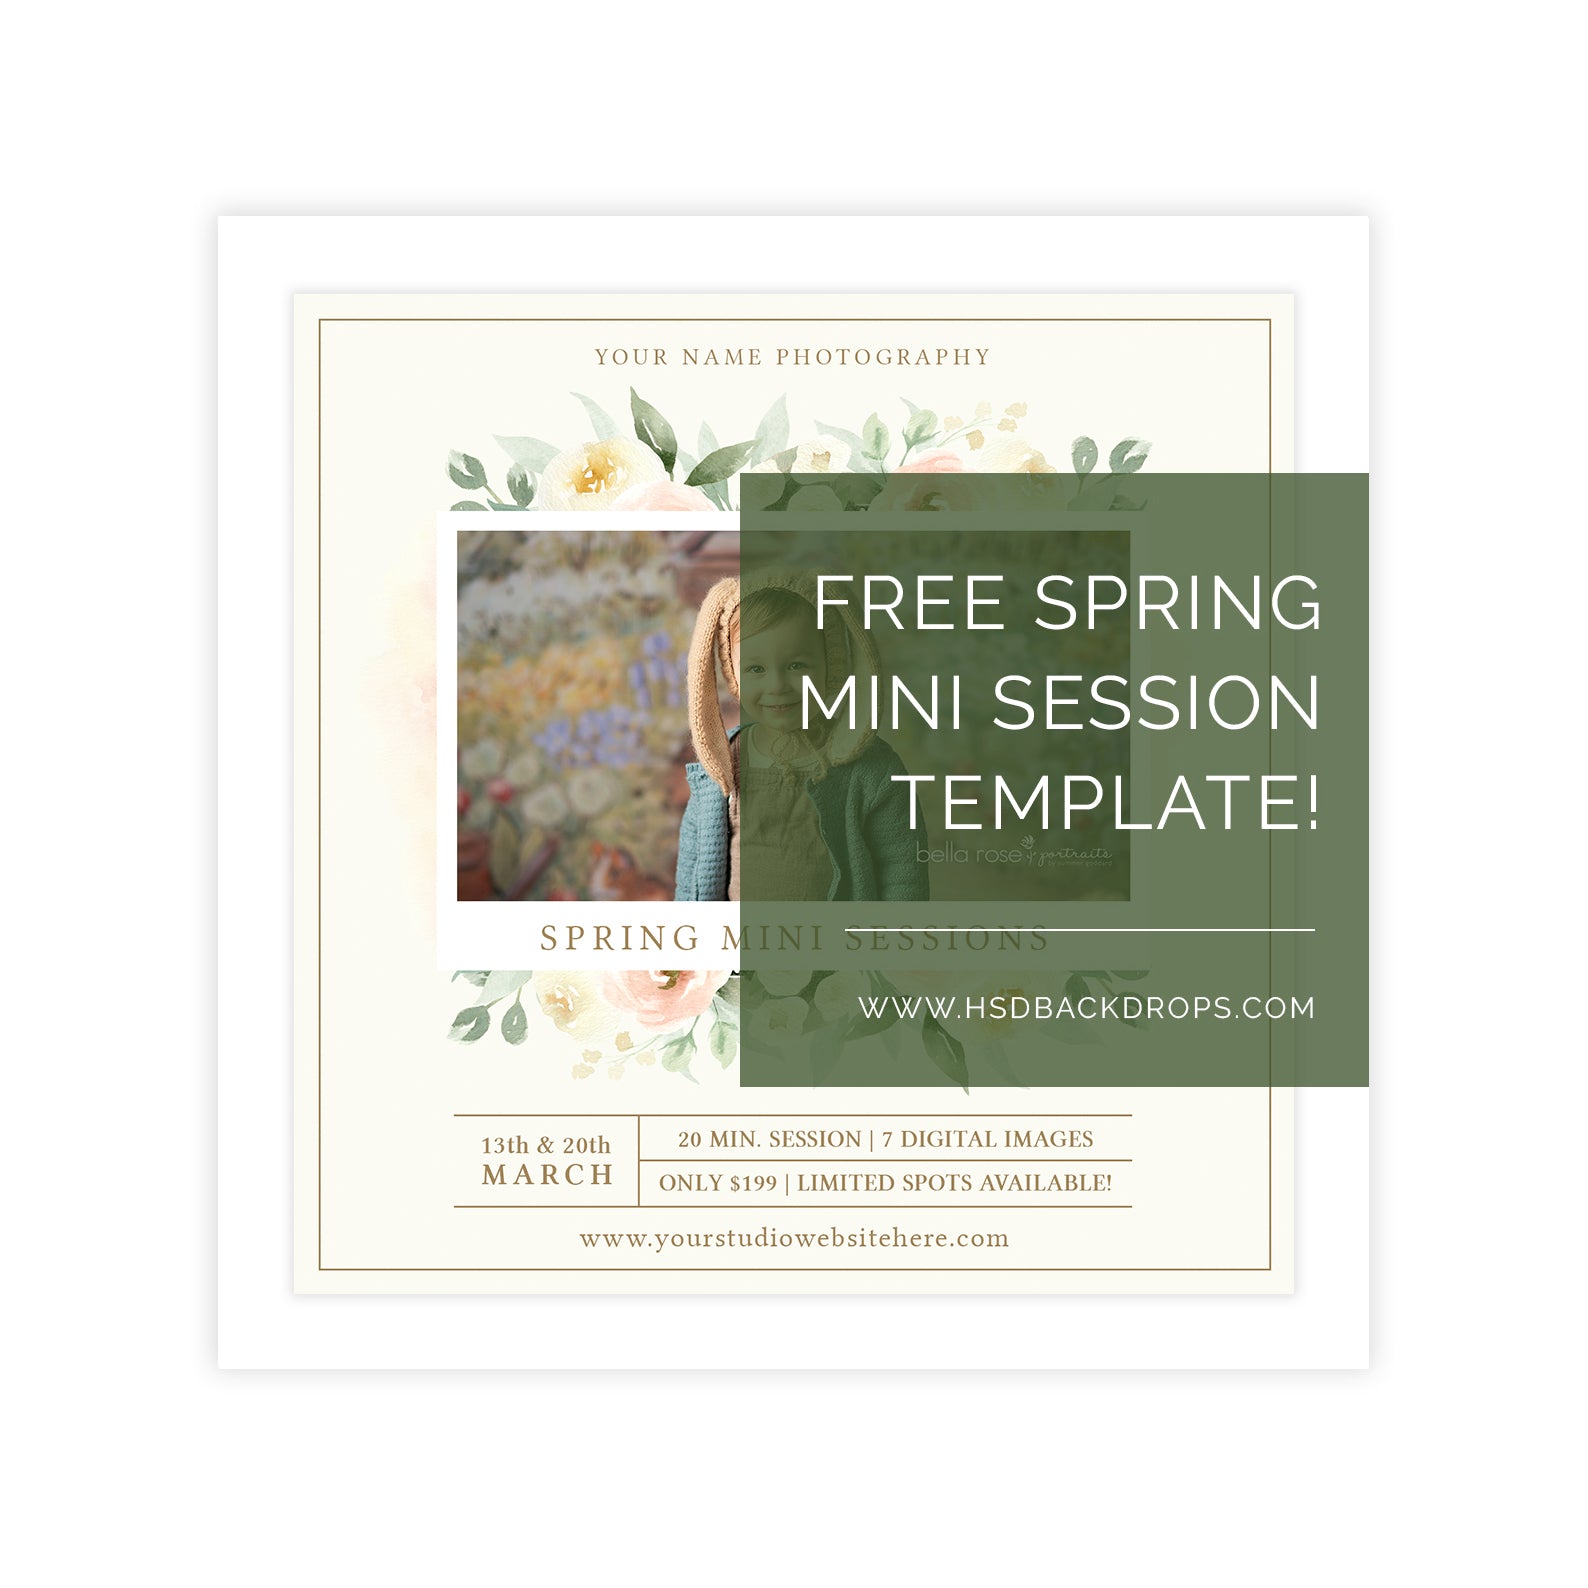 Free mini session template for spring portraits photography template